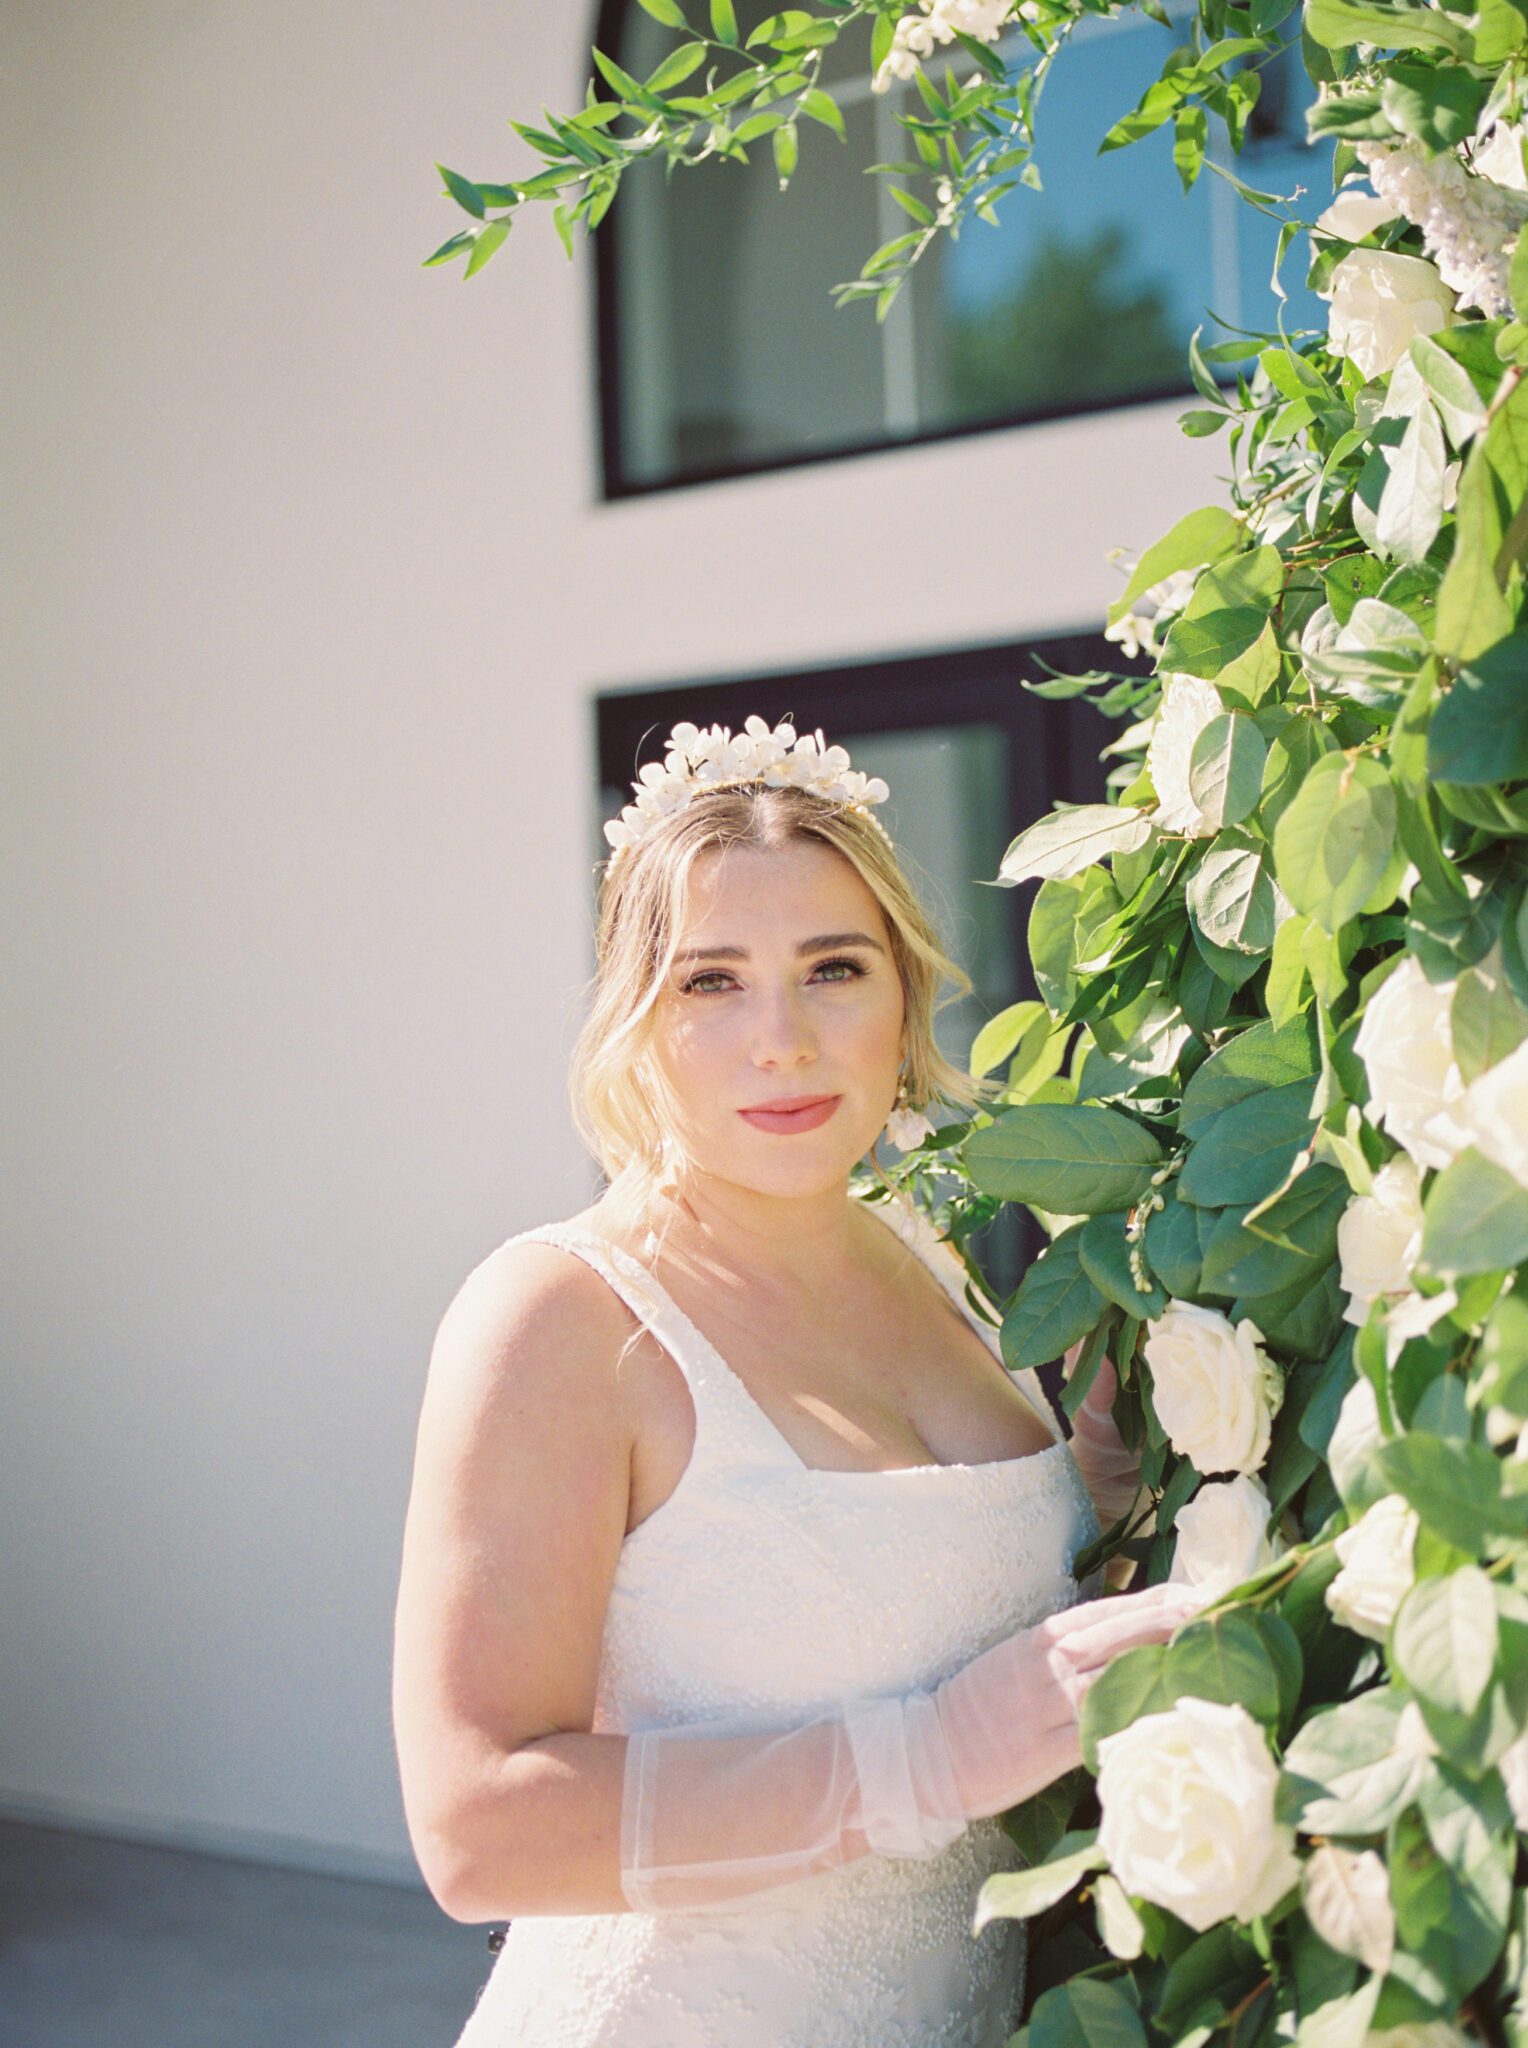 Bride standing in front of lush ivory, white and green floral installation wearing sophisticated yet whimsical bridal gown and jewelry. Outdoor summer wedding inspiration.